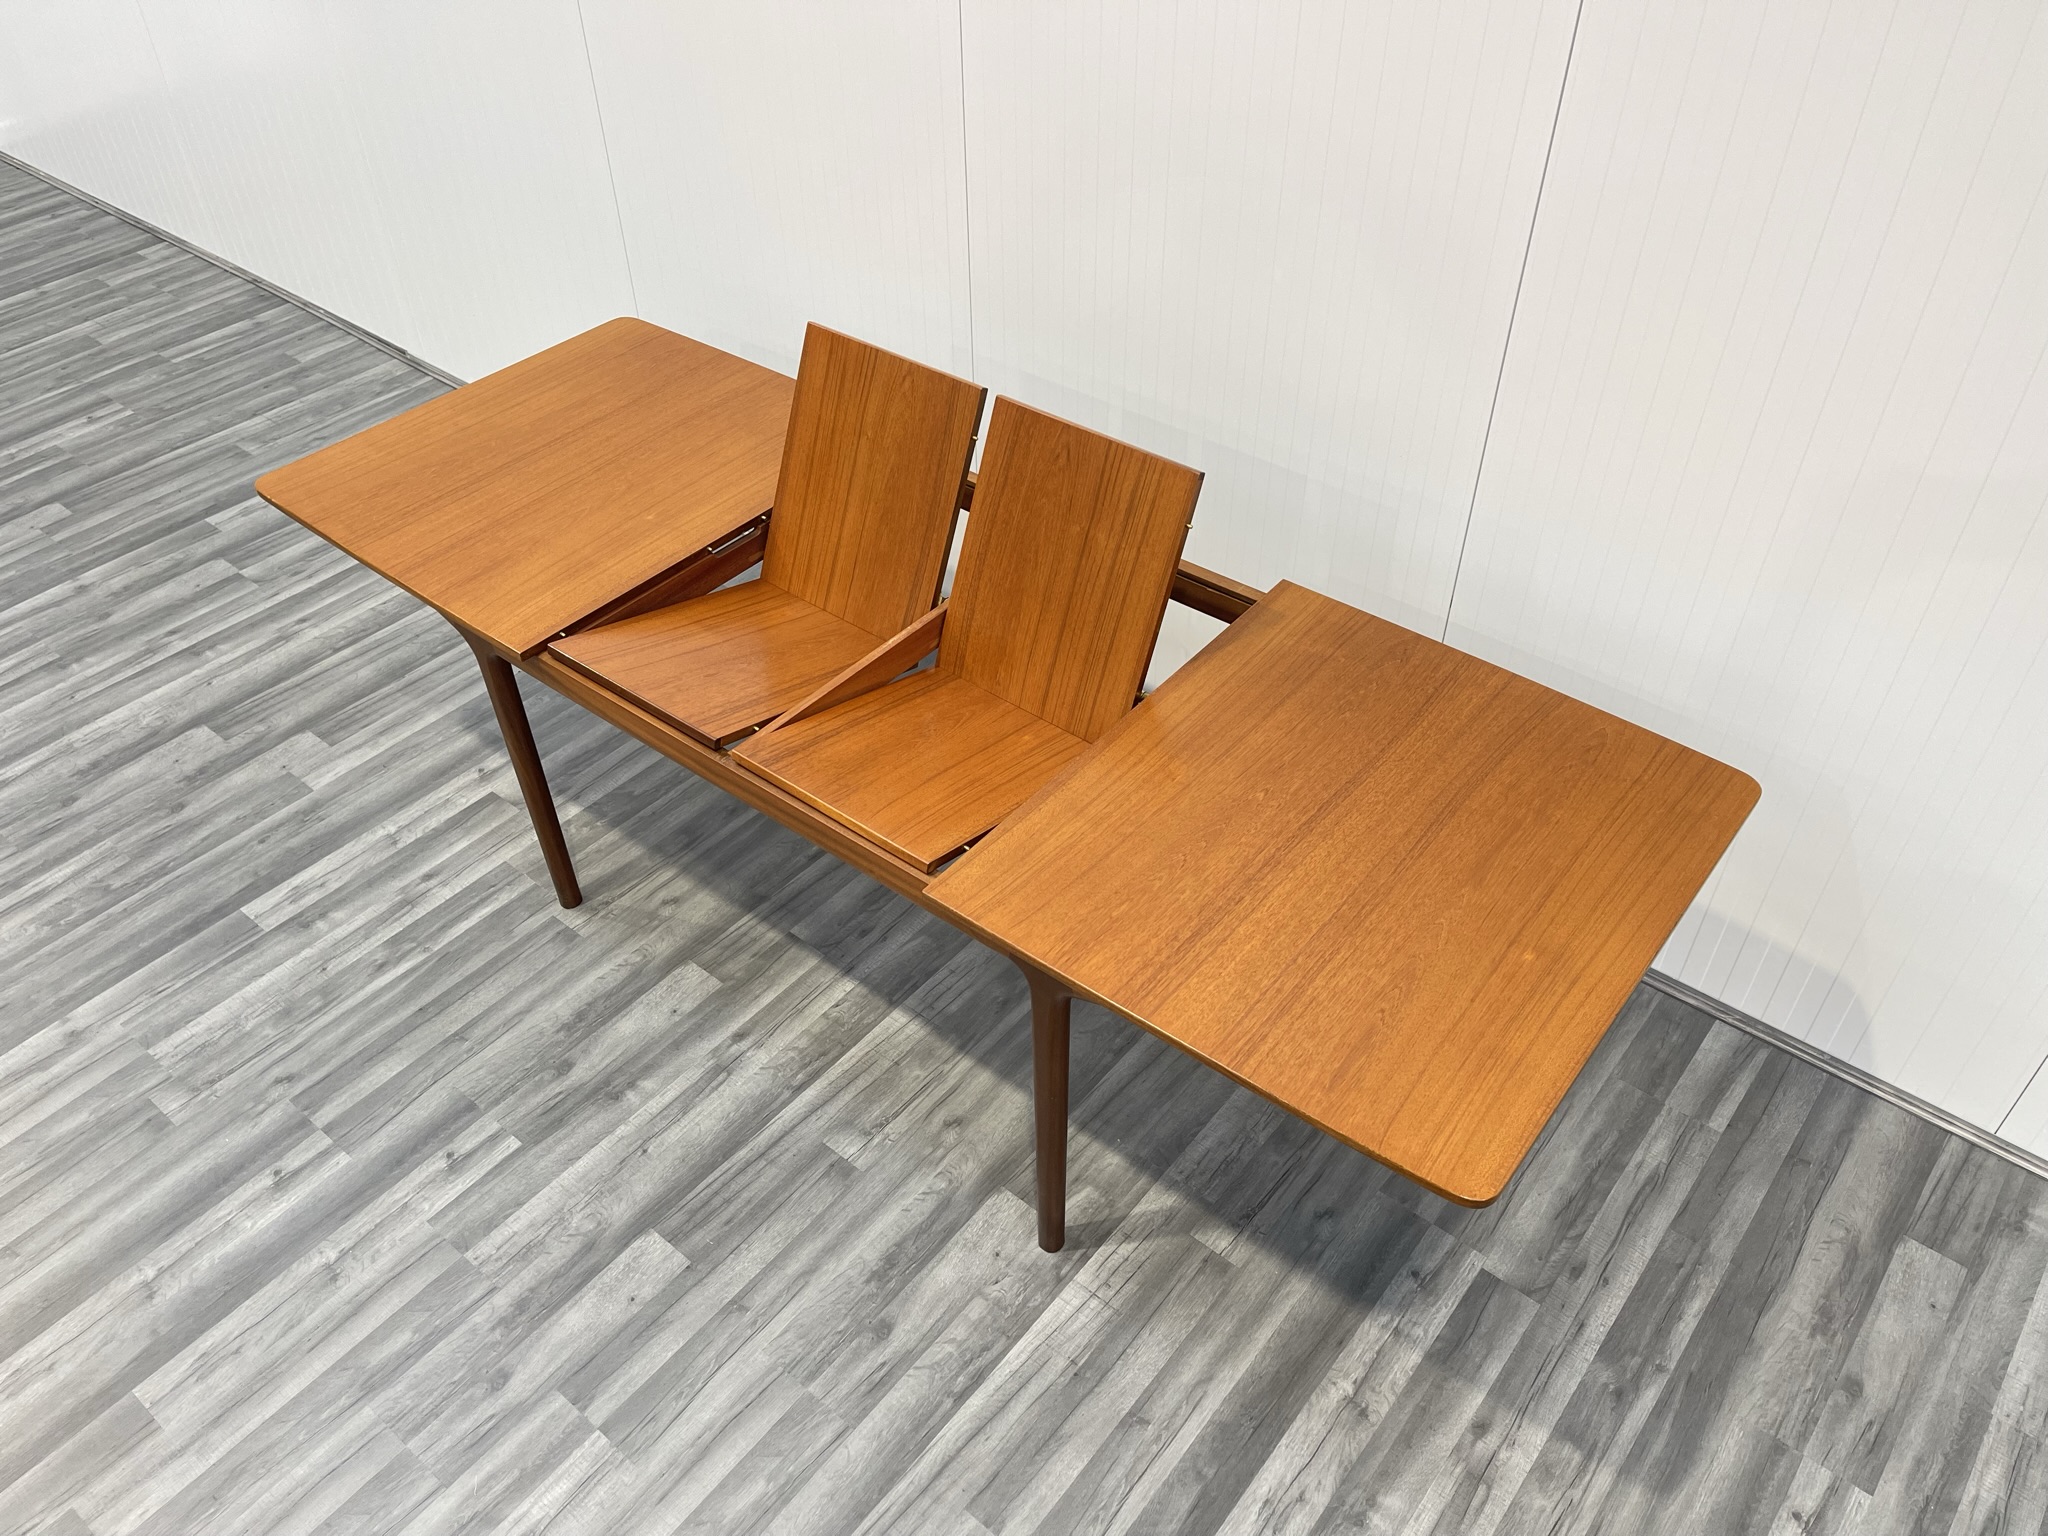 Iconic Vintage Dining Tables : The T3 by Mcintosh